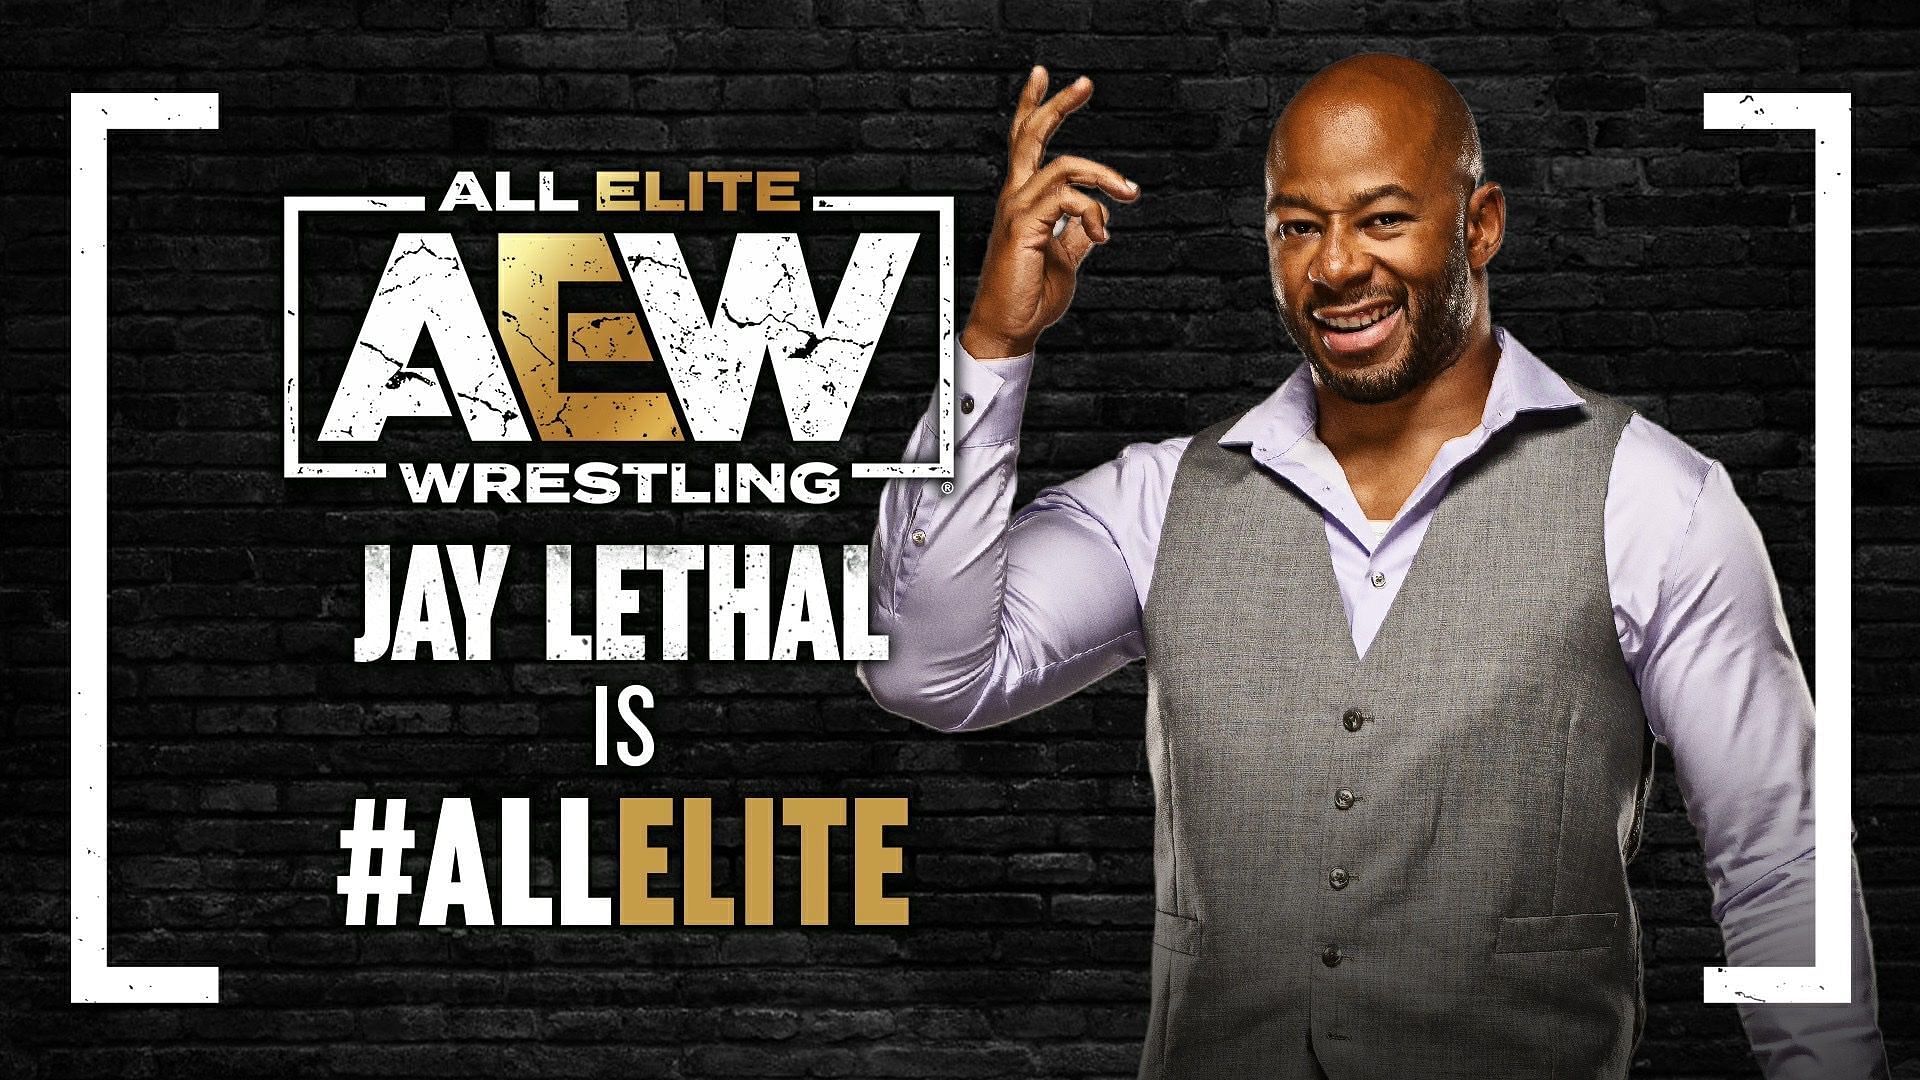 Jay Lethal Signed with AEW at Full Gear